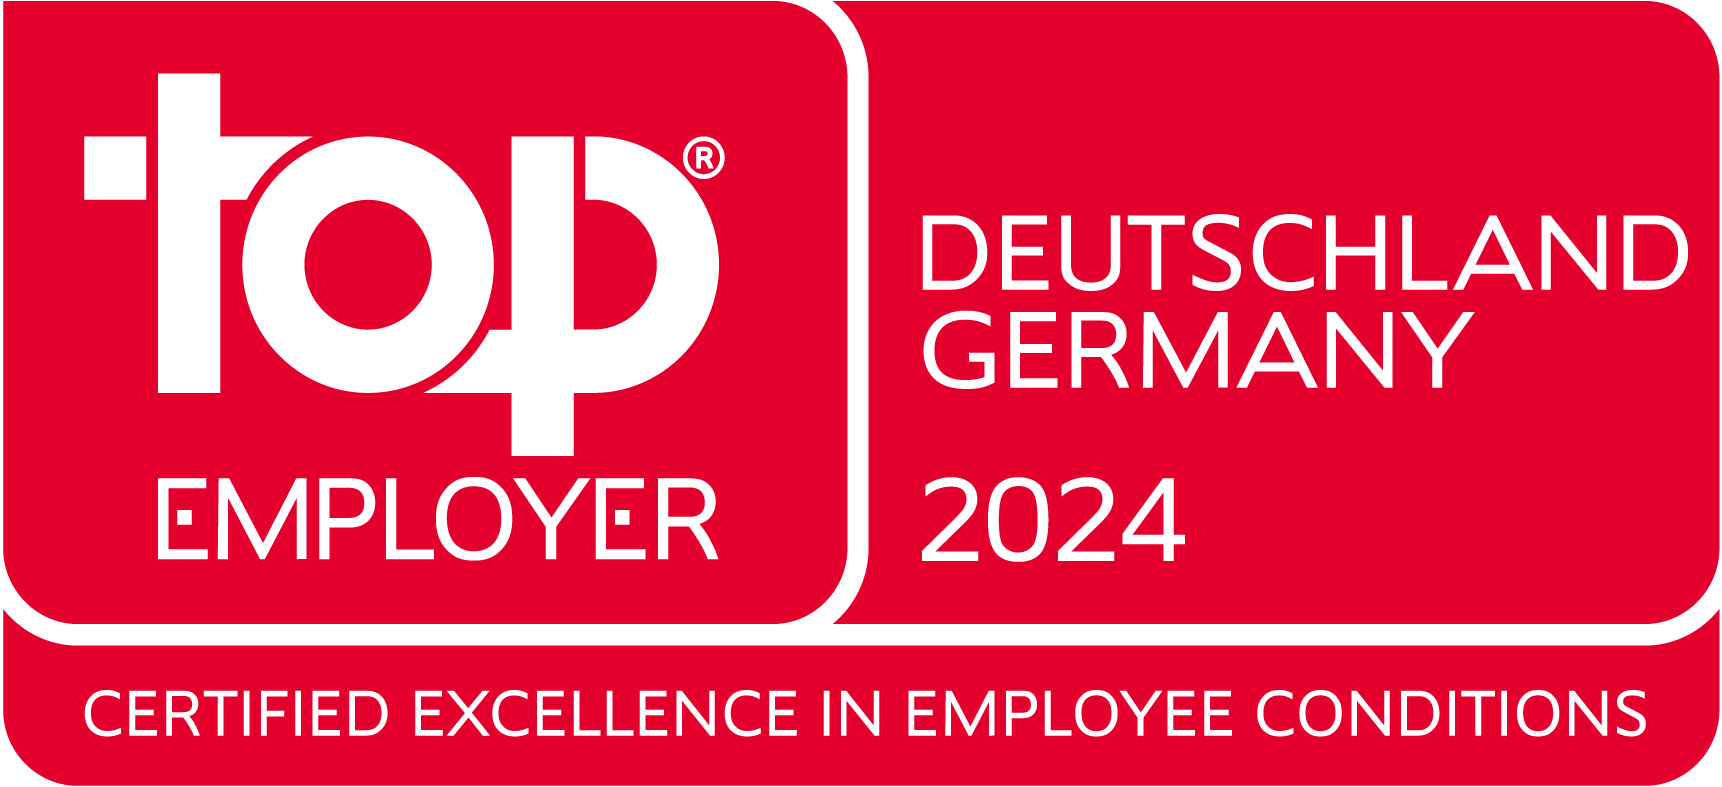 Top Employer Germany